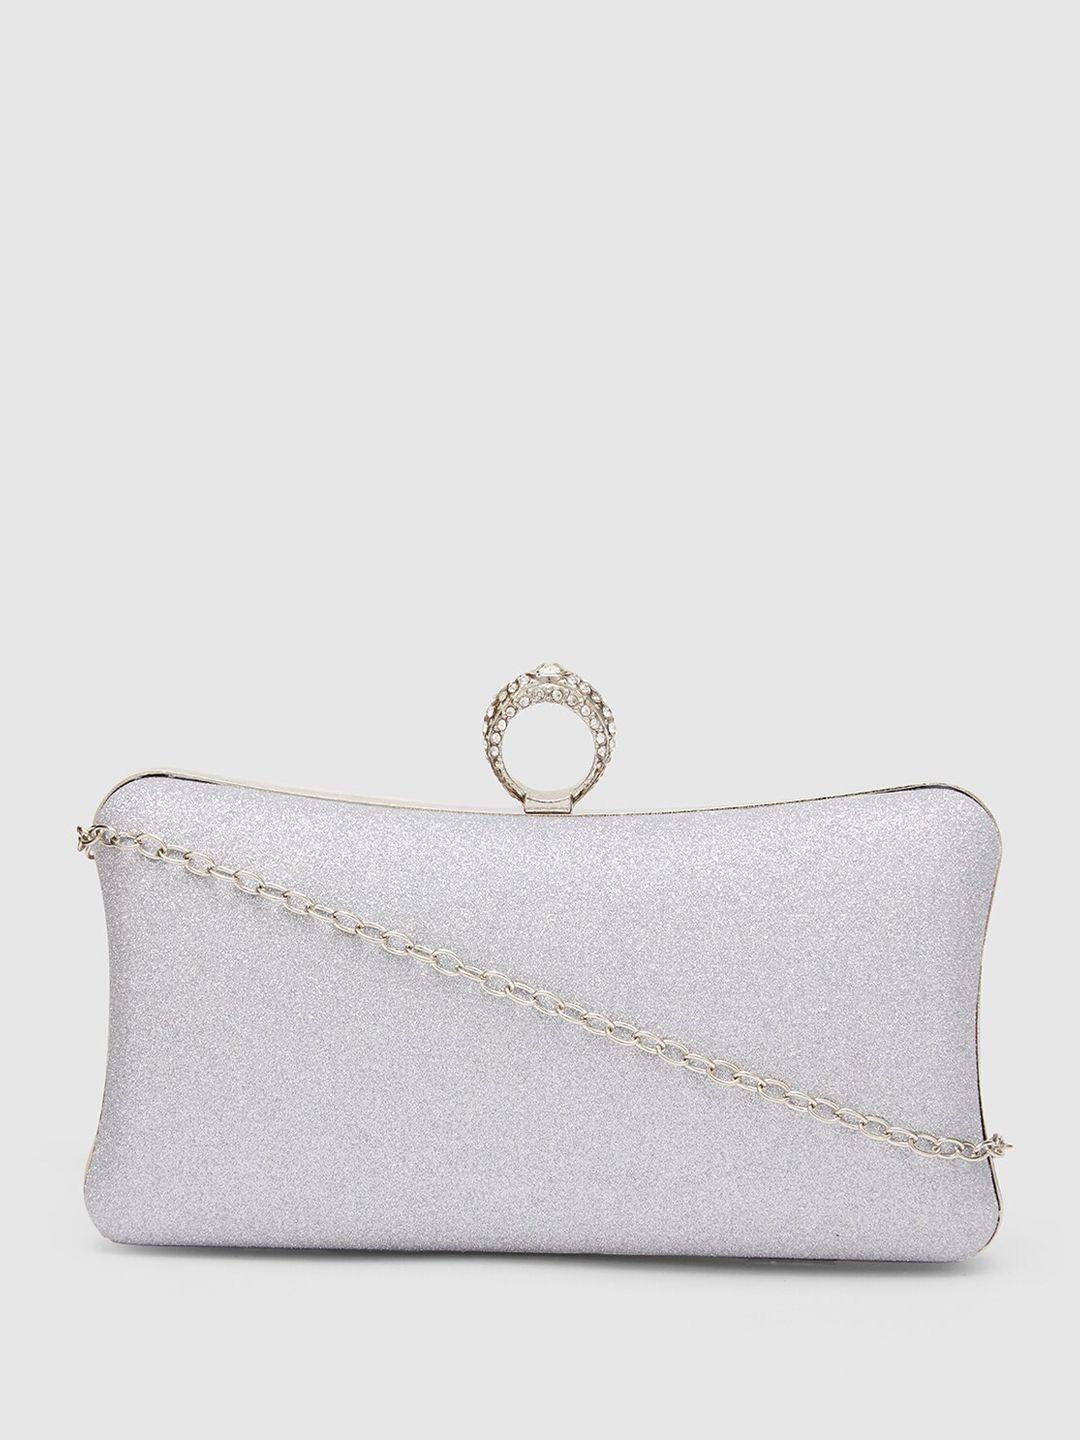 globus embellished party box clutch